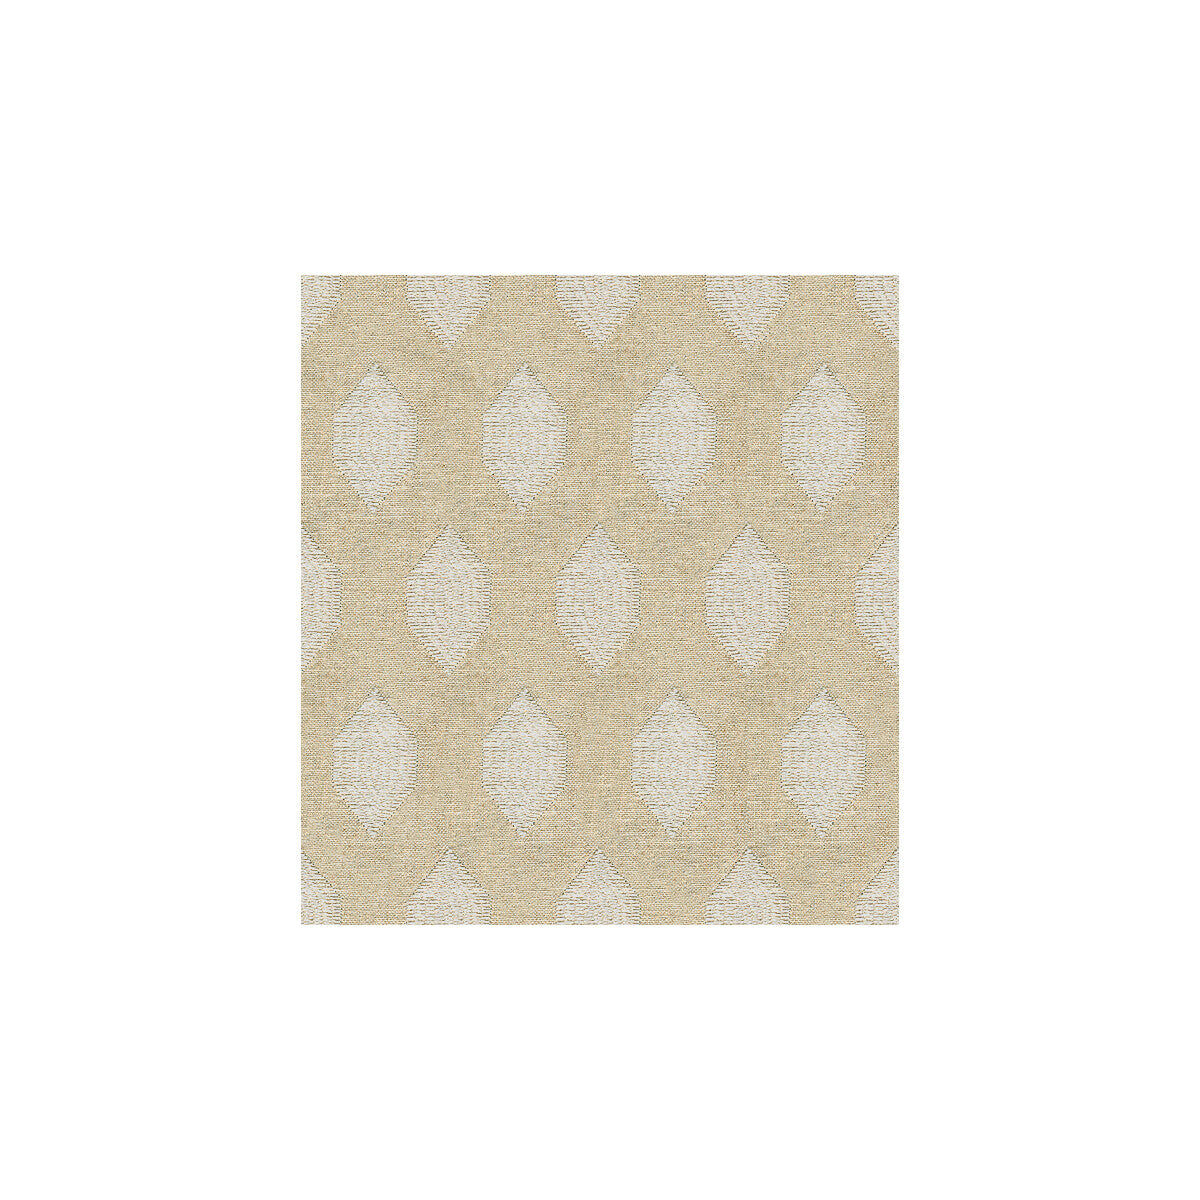 Kravet Design fabric in 33145-16 color - pattern 33145.16.0 - by Kravet Design in the Echo Heirloom India collection